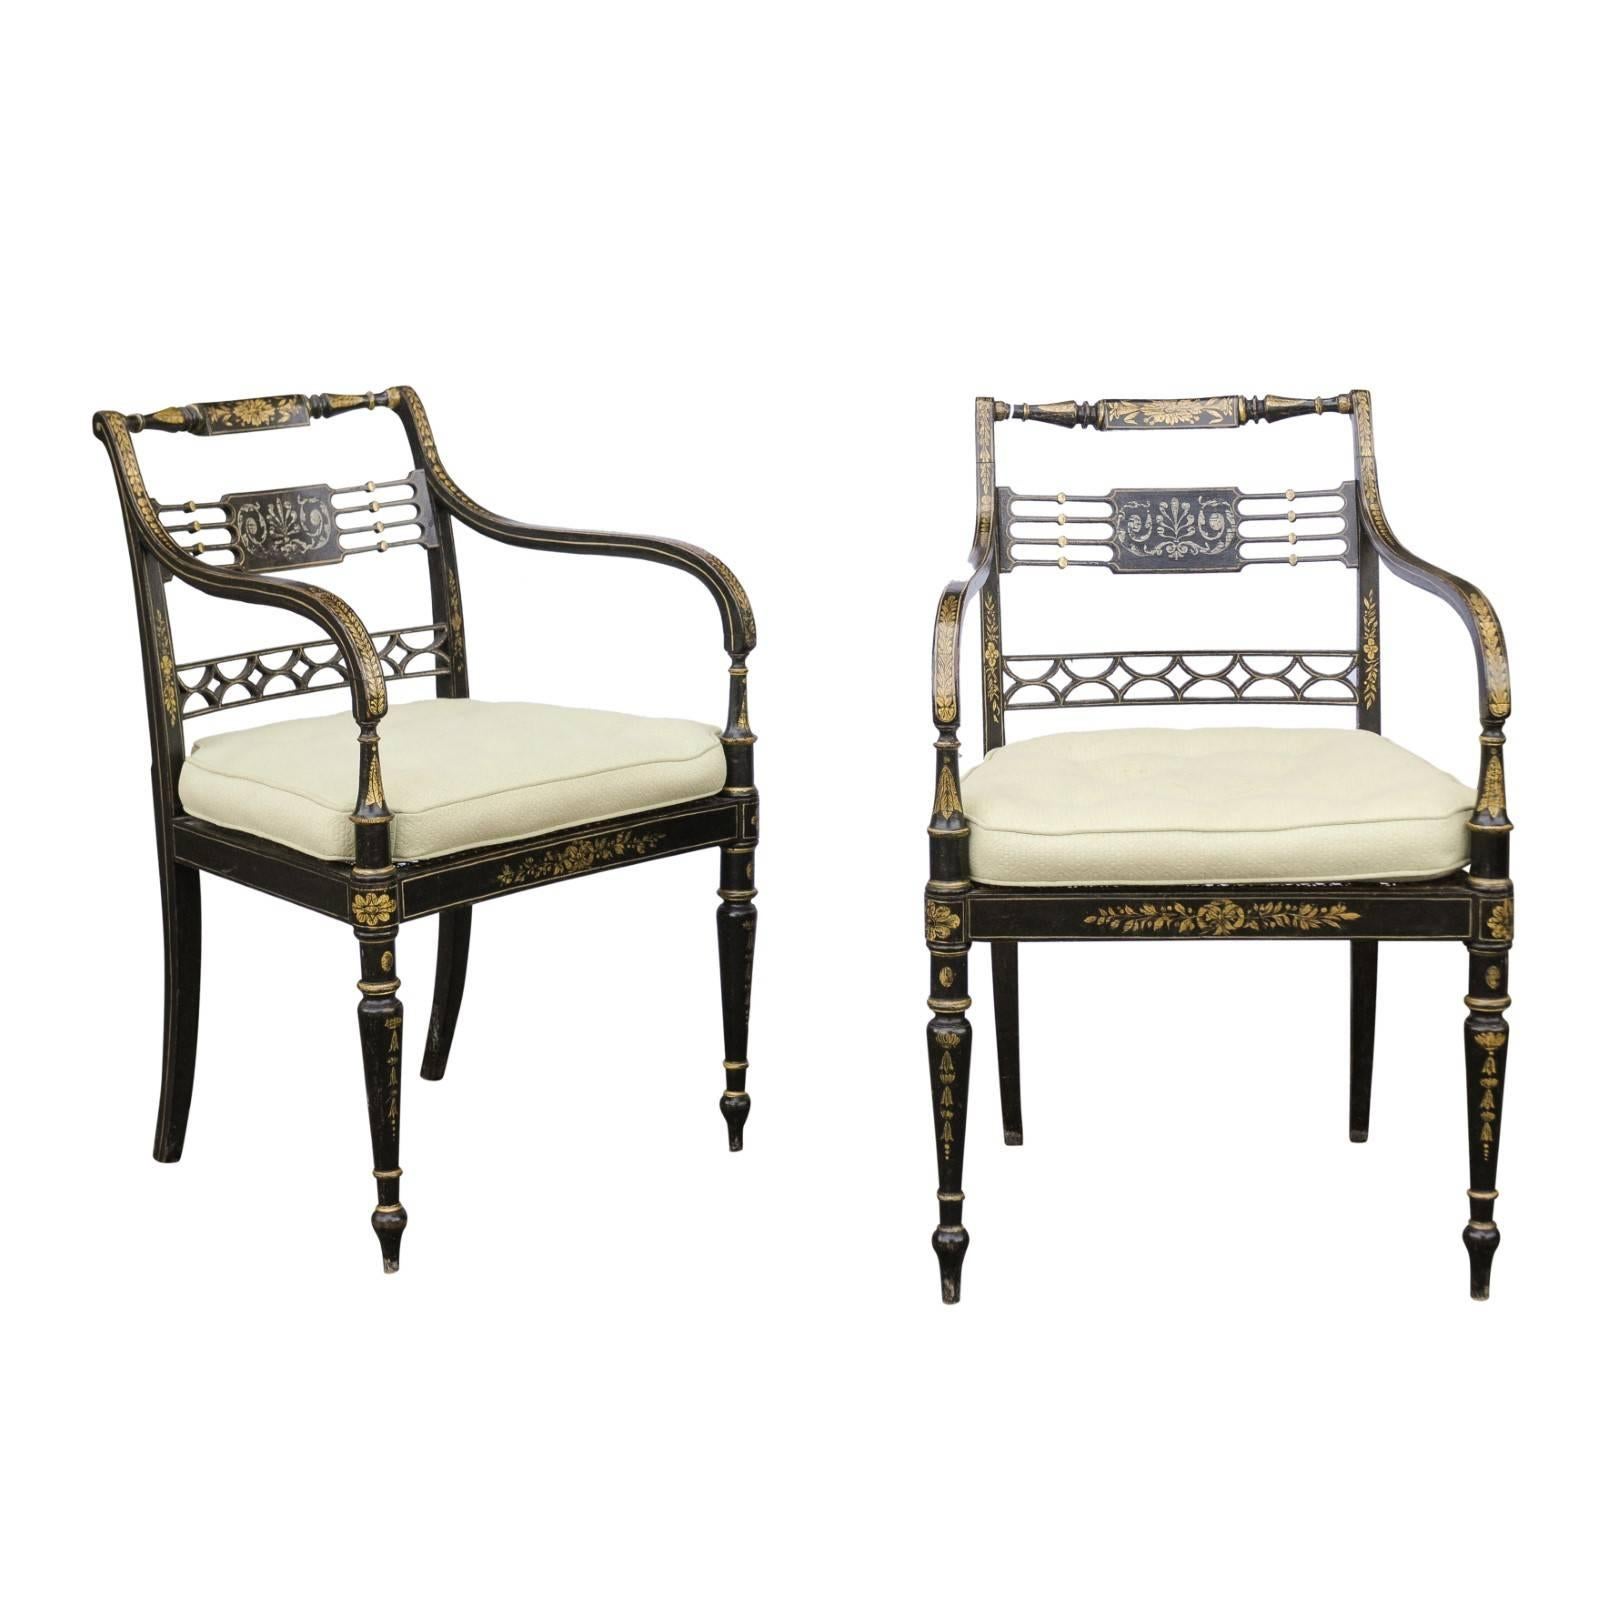 Pair of English 1850s Regency Style Ebonized Wood Armchairs with Gilded Accents